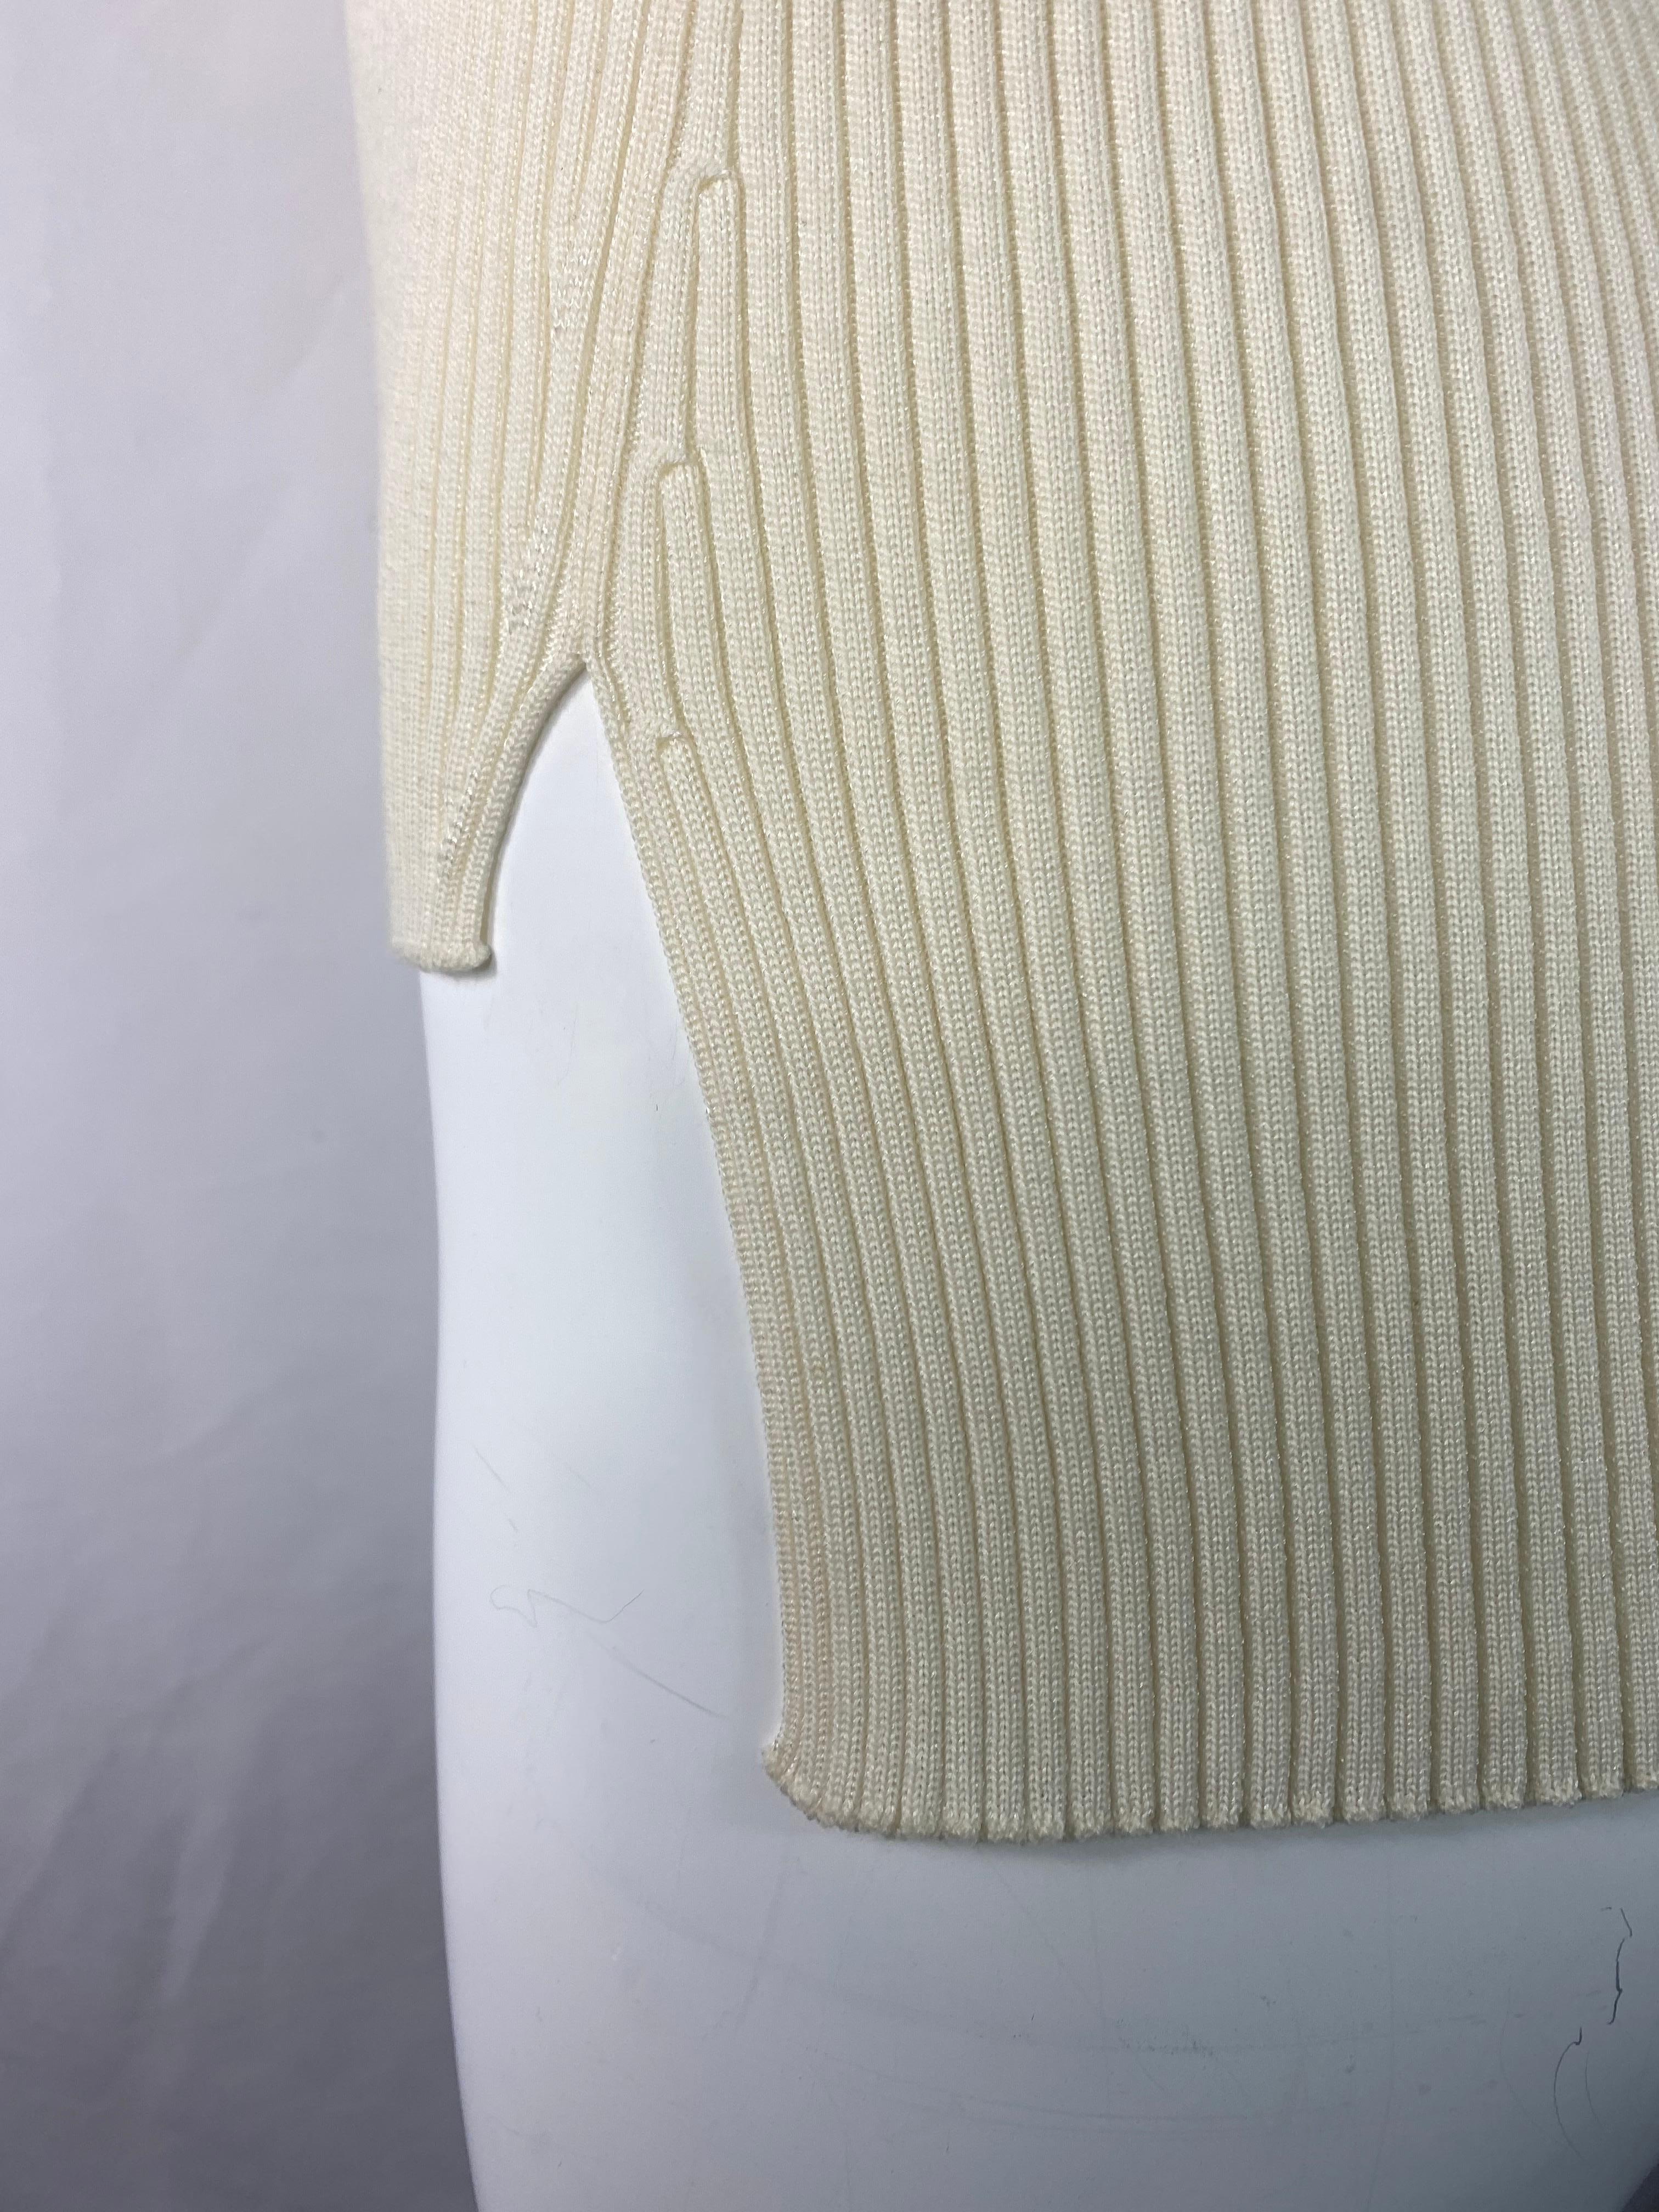 Gray CELINE Cream/ Ivory Knit Top, Size Large For Sale